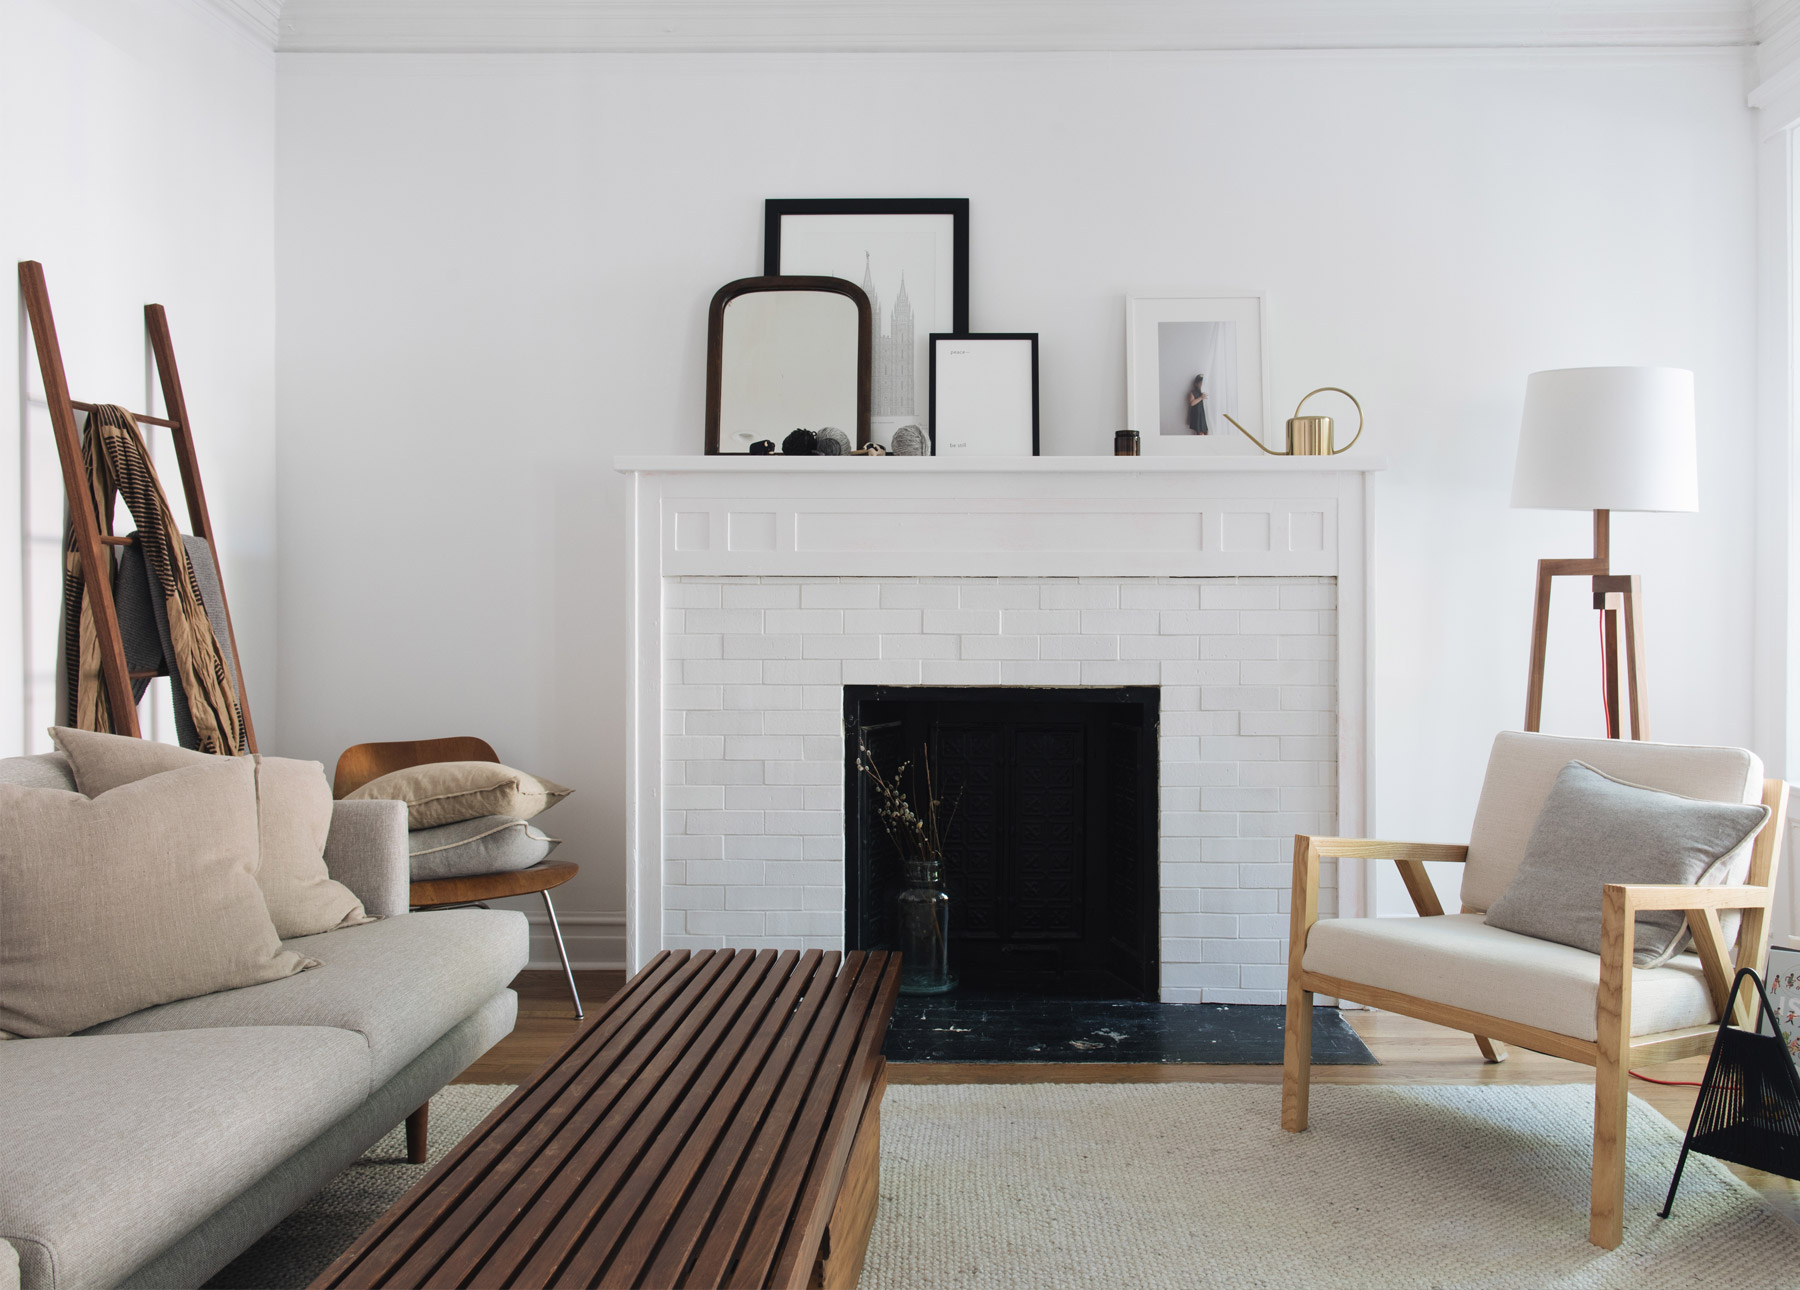 A white fireplace in a minimalist home.